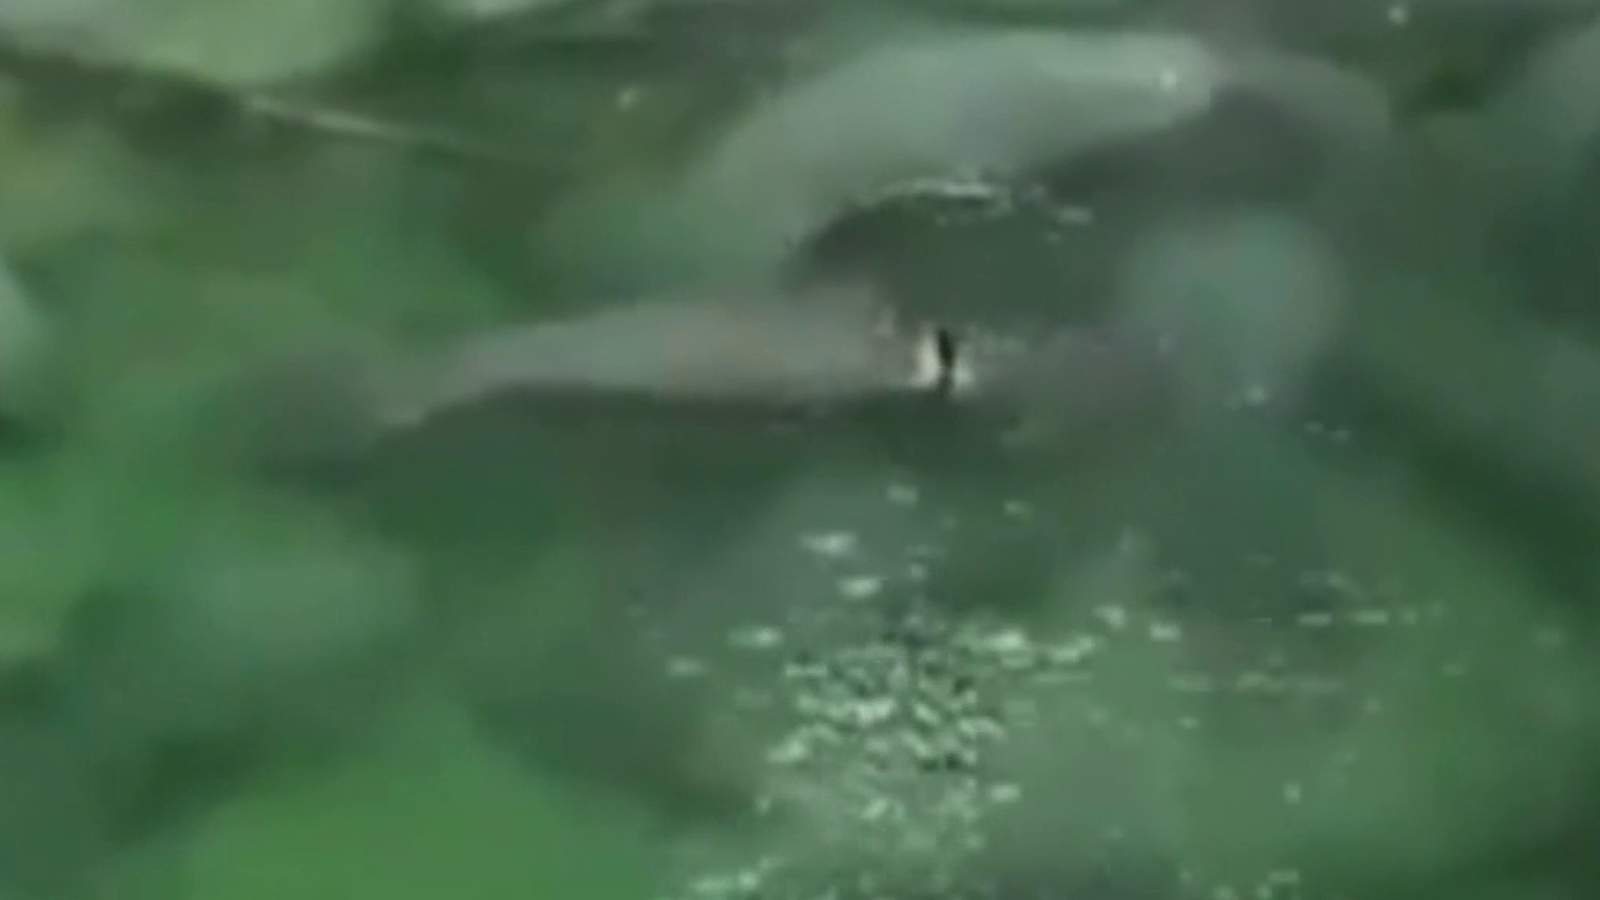 Wheelie! Manatee with tire stuck around belly spotted again at state park